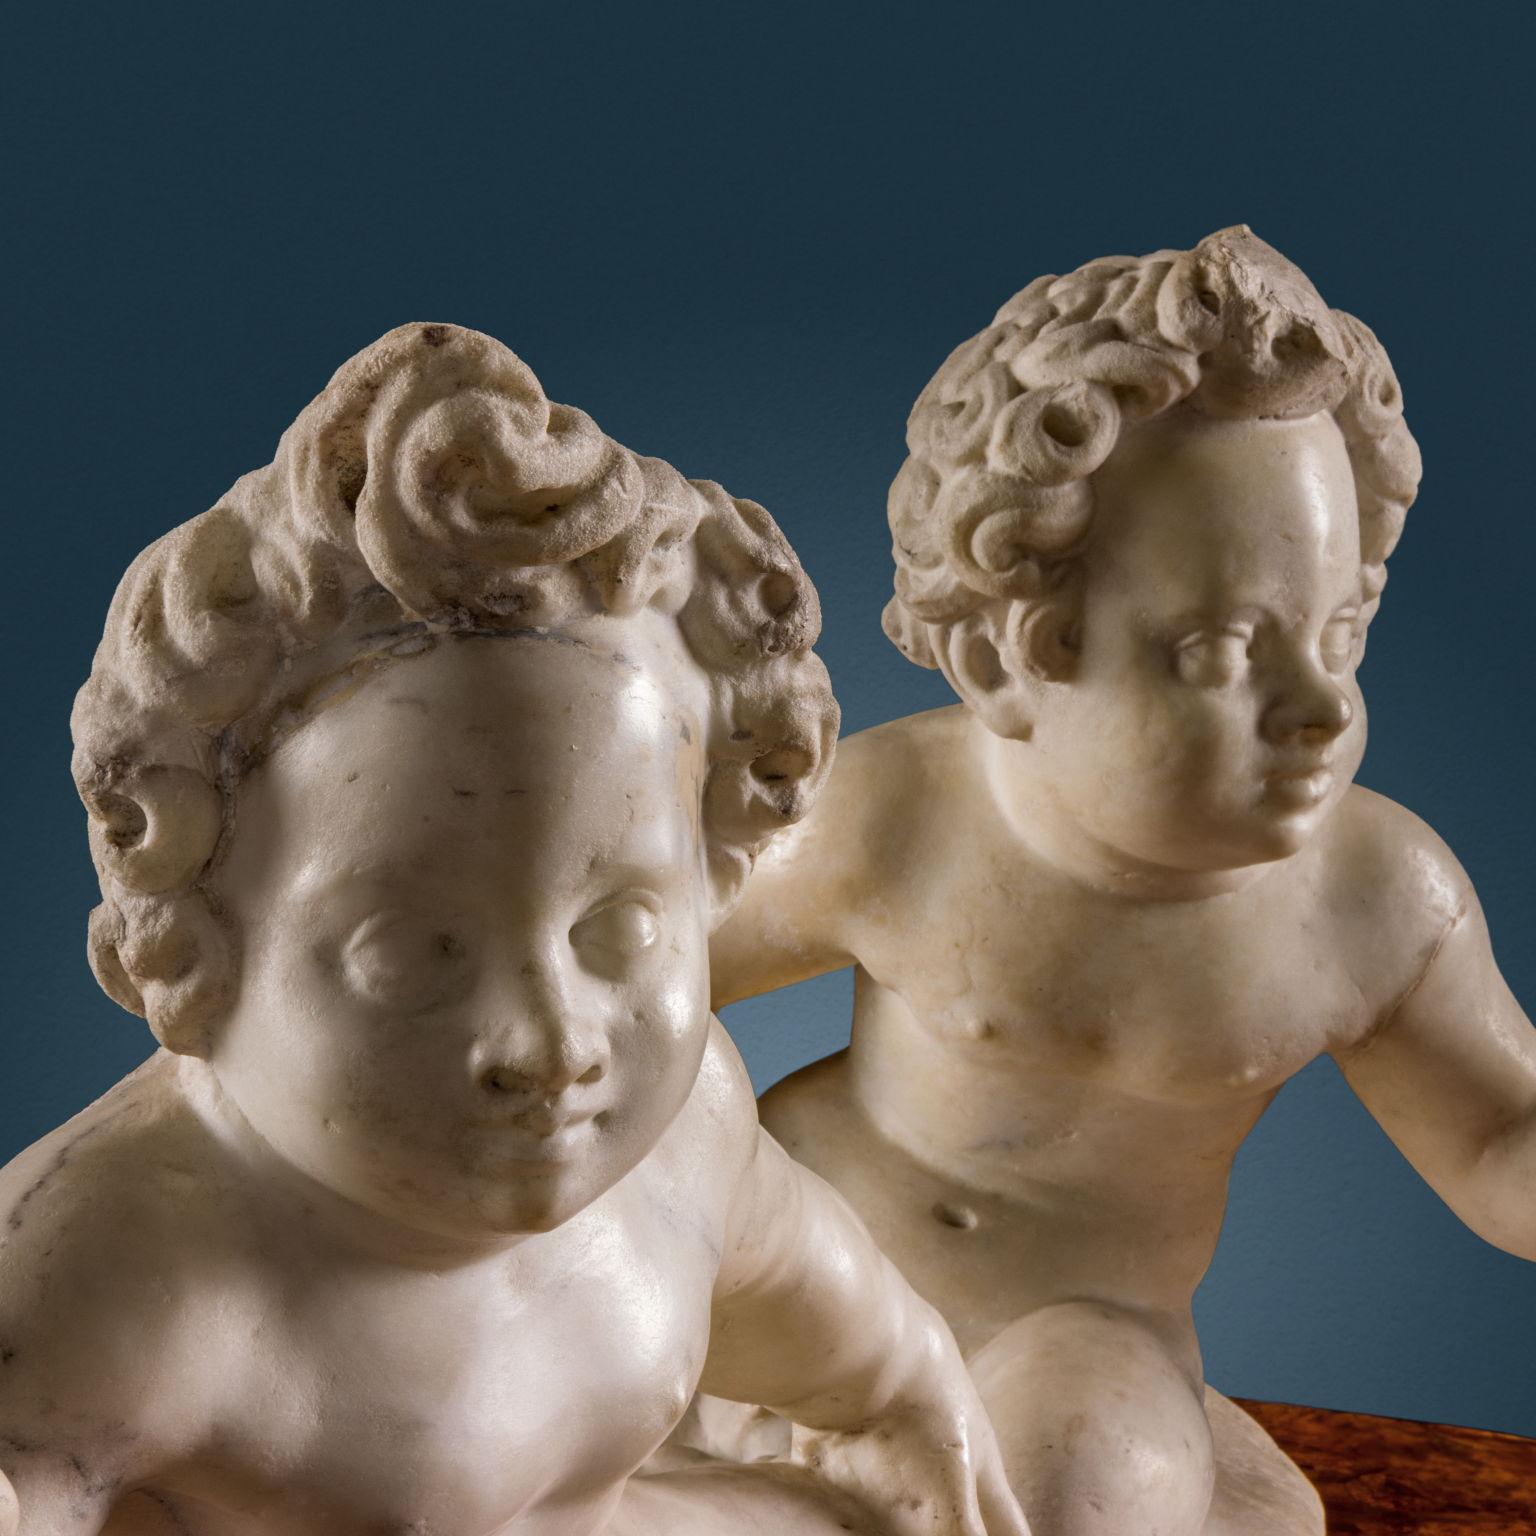 Other Two Putti, c. 1640-1650. Giovanni Pietro and Carlo Carra (workshop of) For Sale